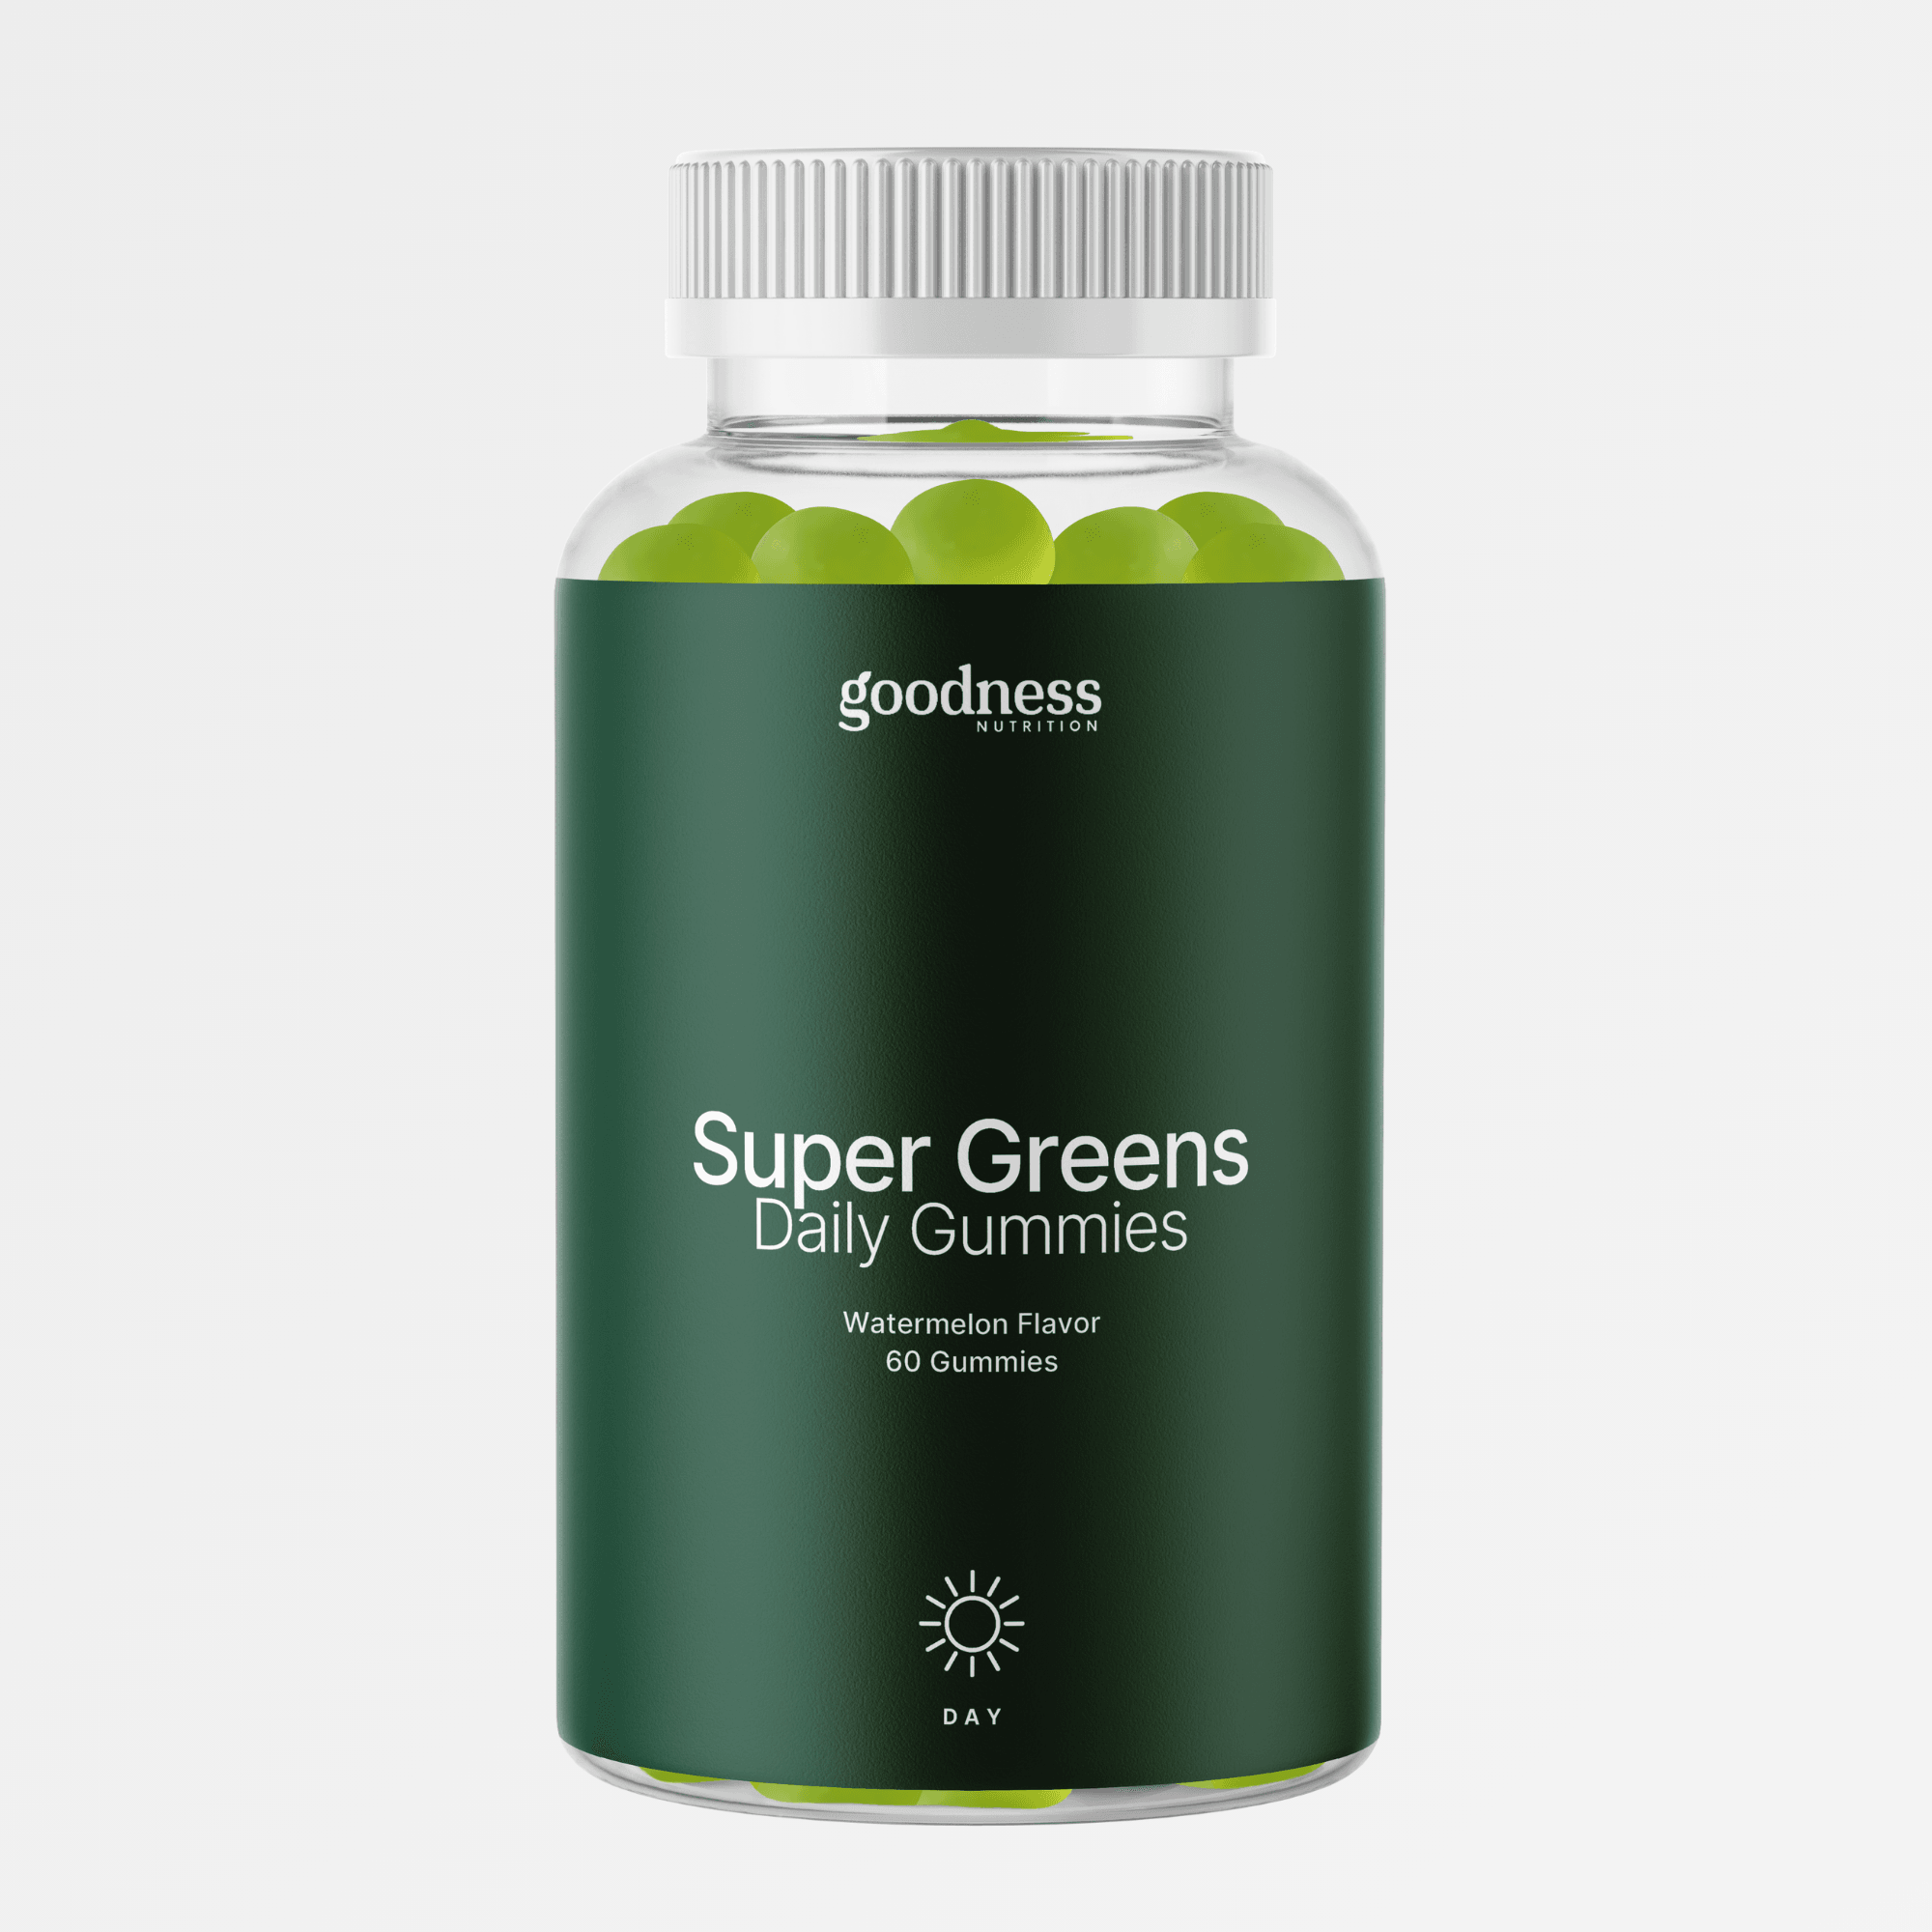 Super Greens Daily Gummies - Goodness Nutrition